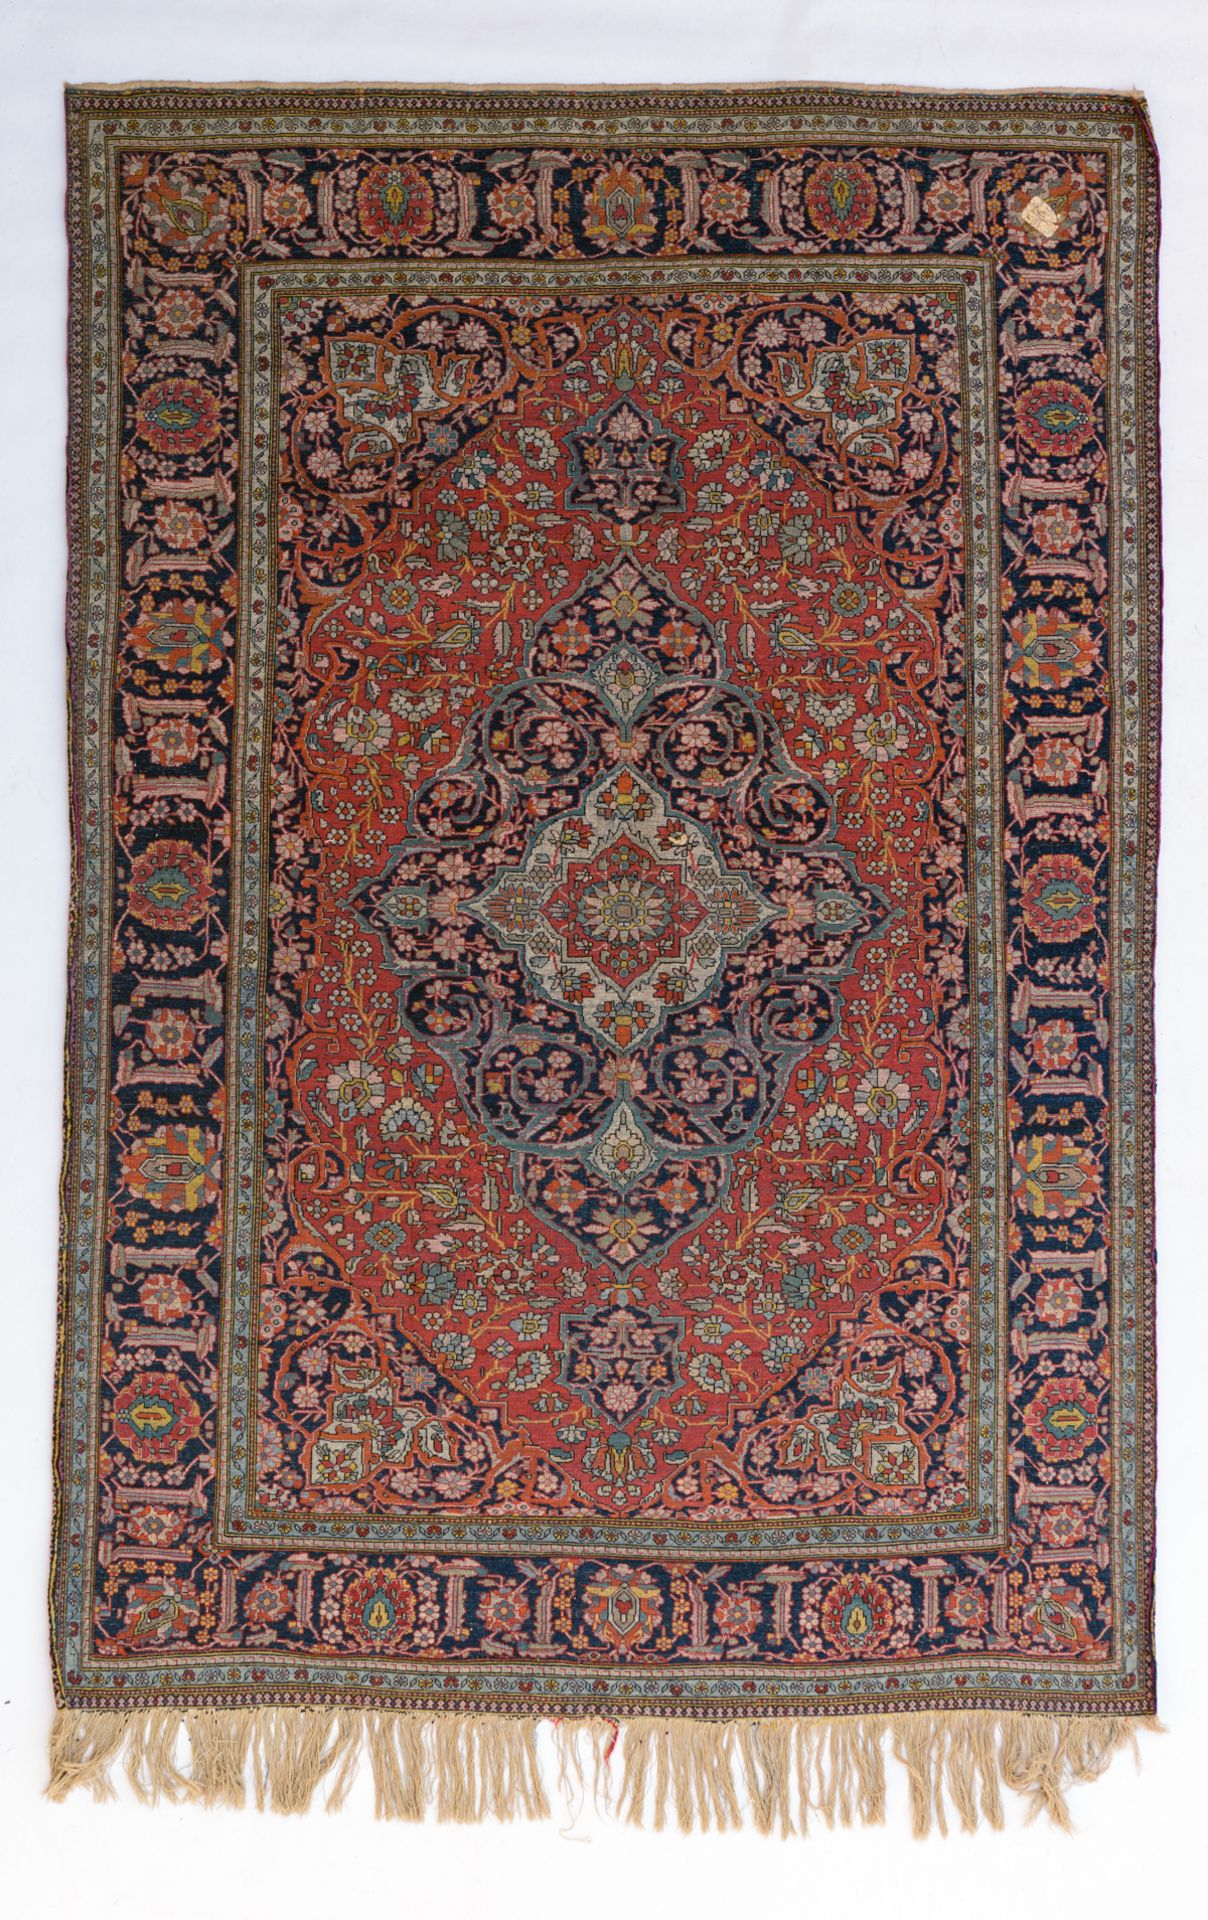 An Oriental Kashan rug, workshop of Atorie Mohtacham, floral decorated, 137 x 197 cm - Image 2 of 3